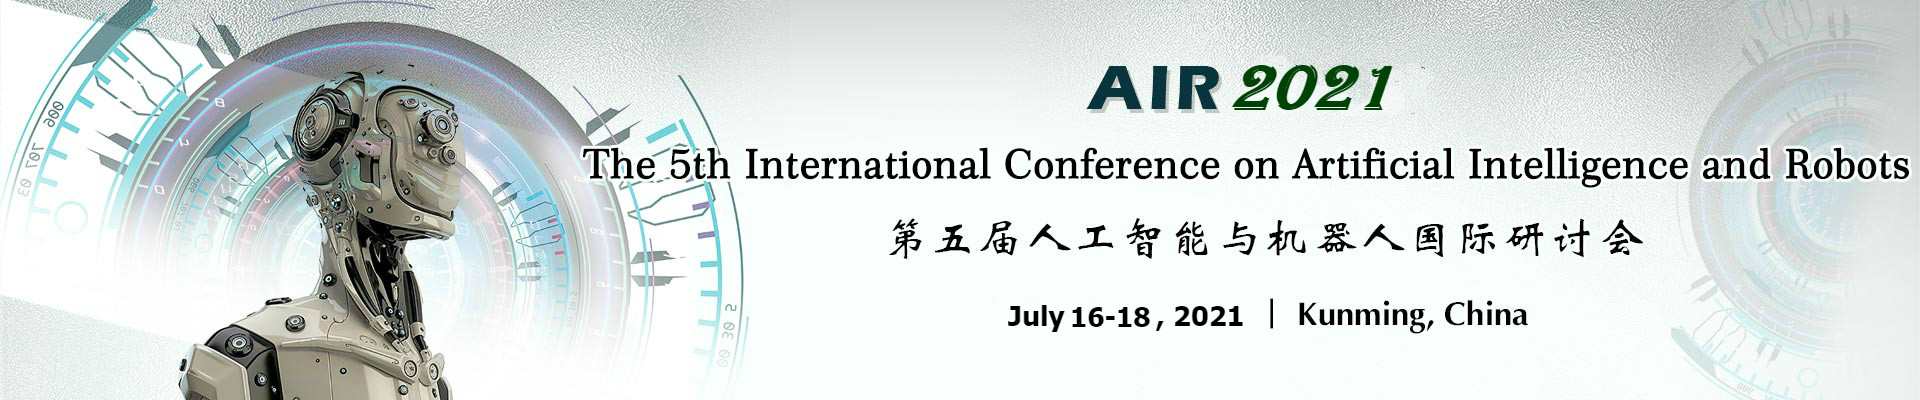 The 5th International Conference on Artificial Intelligence and Robots (AIR 2021), Kunming, Yunnan, China